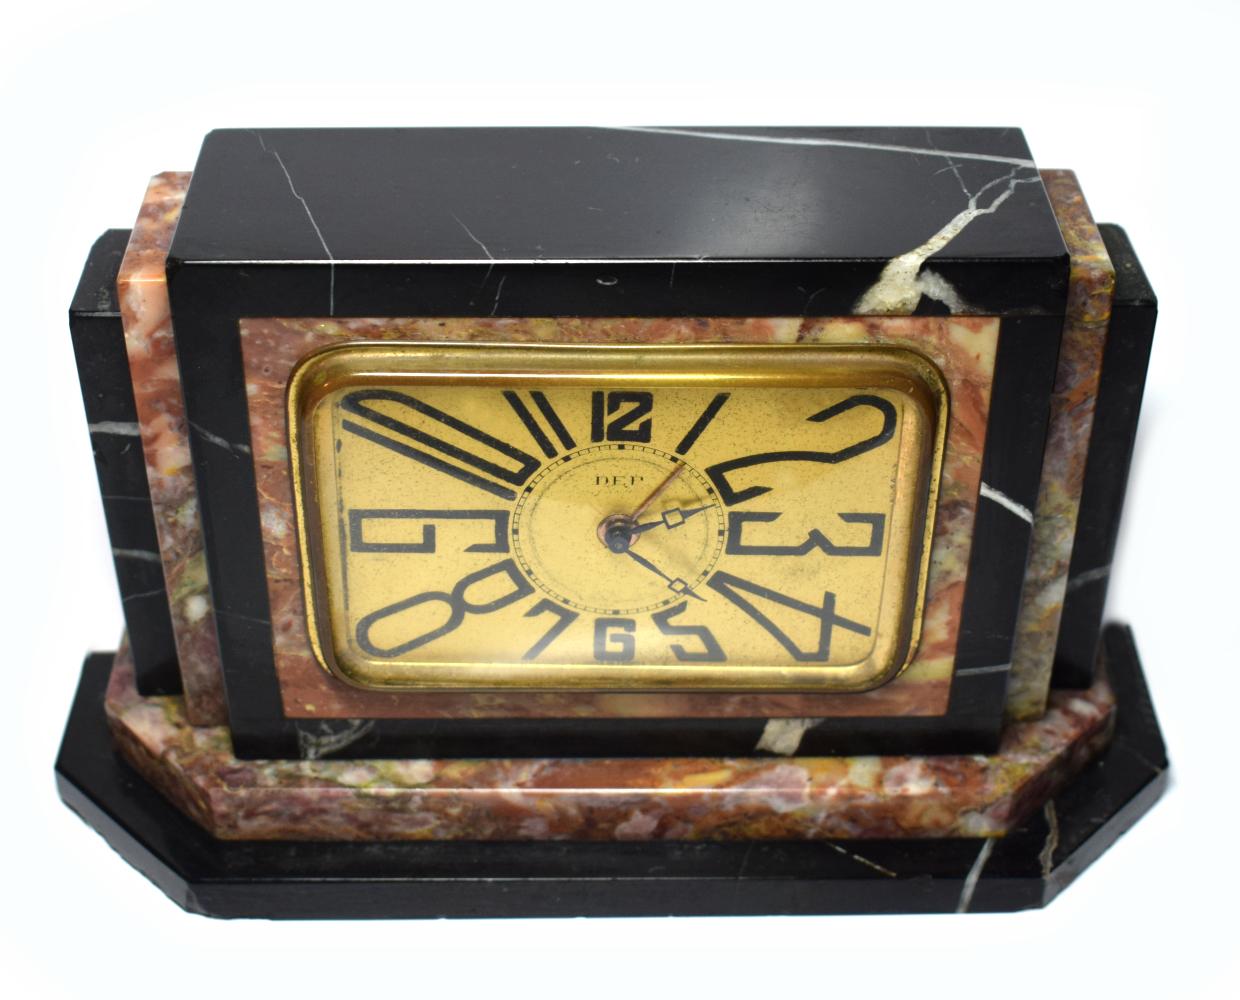 Very striking 1930s Art Deco French clock by Dep. The case is solid multi-colored marble, the bezel and face are in gold tone metal. Very iconic Art Deco stretched numerals. This clock is a really cute size and ideal as a bedroom clock or side